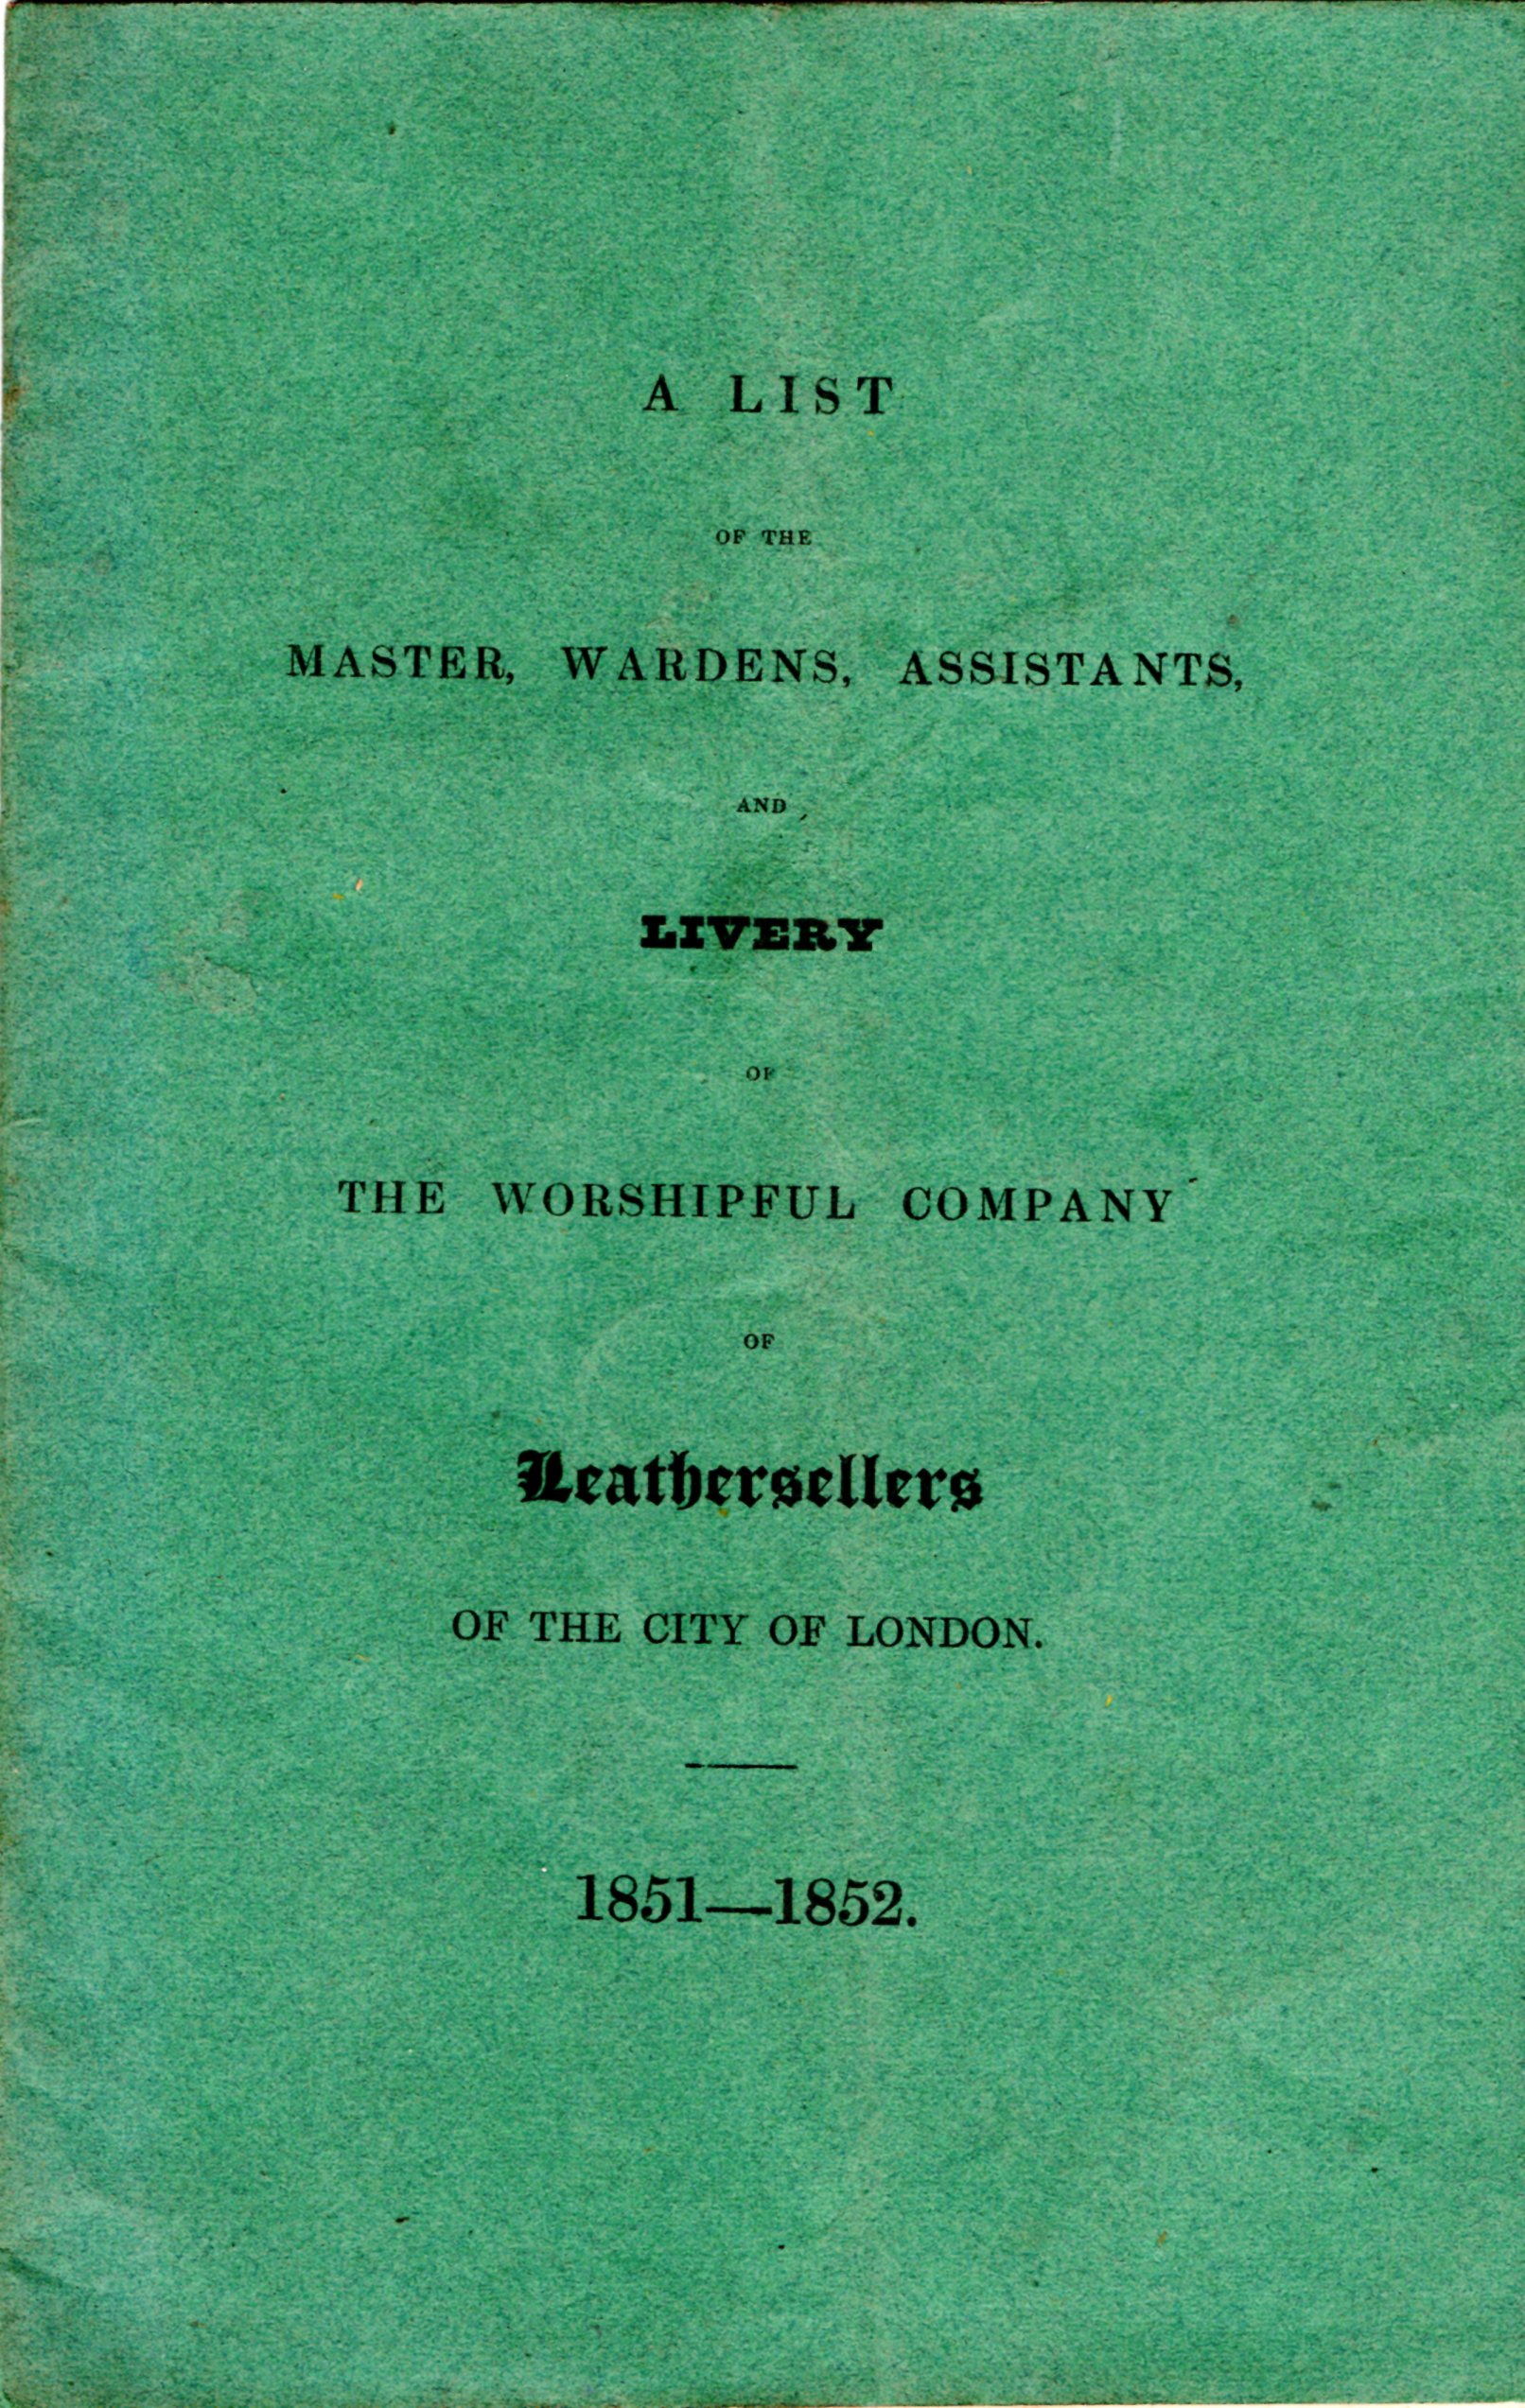 Image for A List of the Master, Wardens, Assistants and Livery of the Worshipful Company of Leathersellers of the City of London 1851-1852